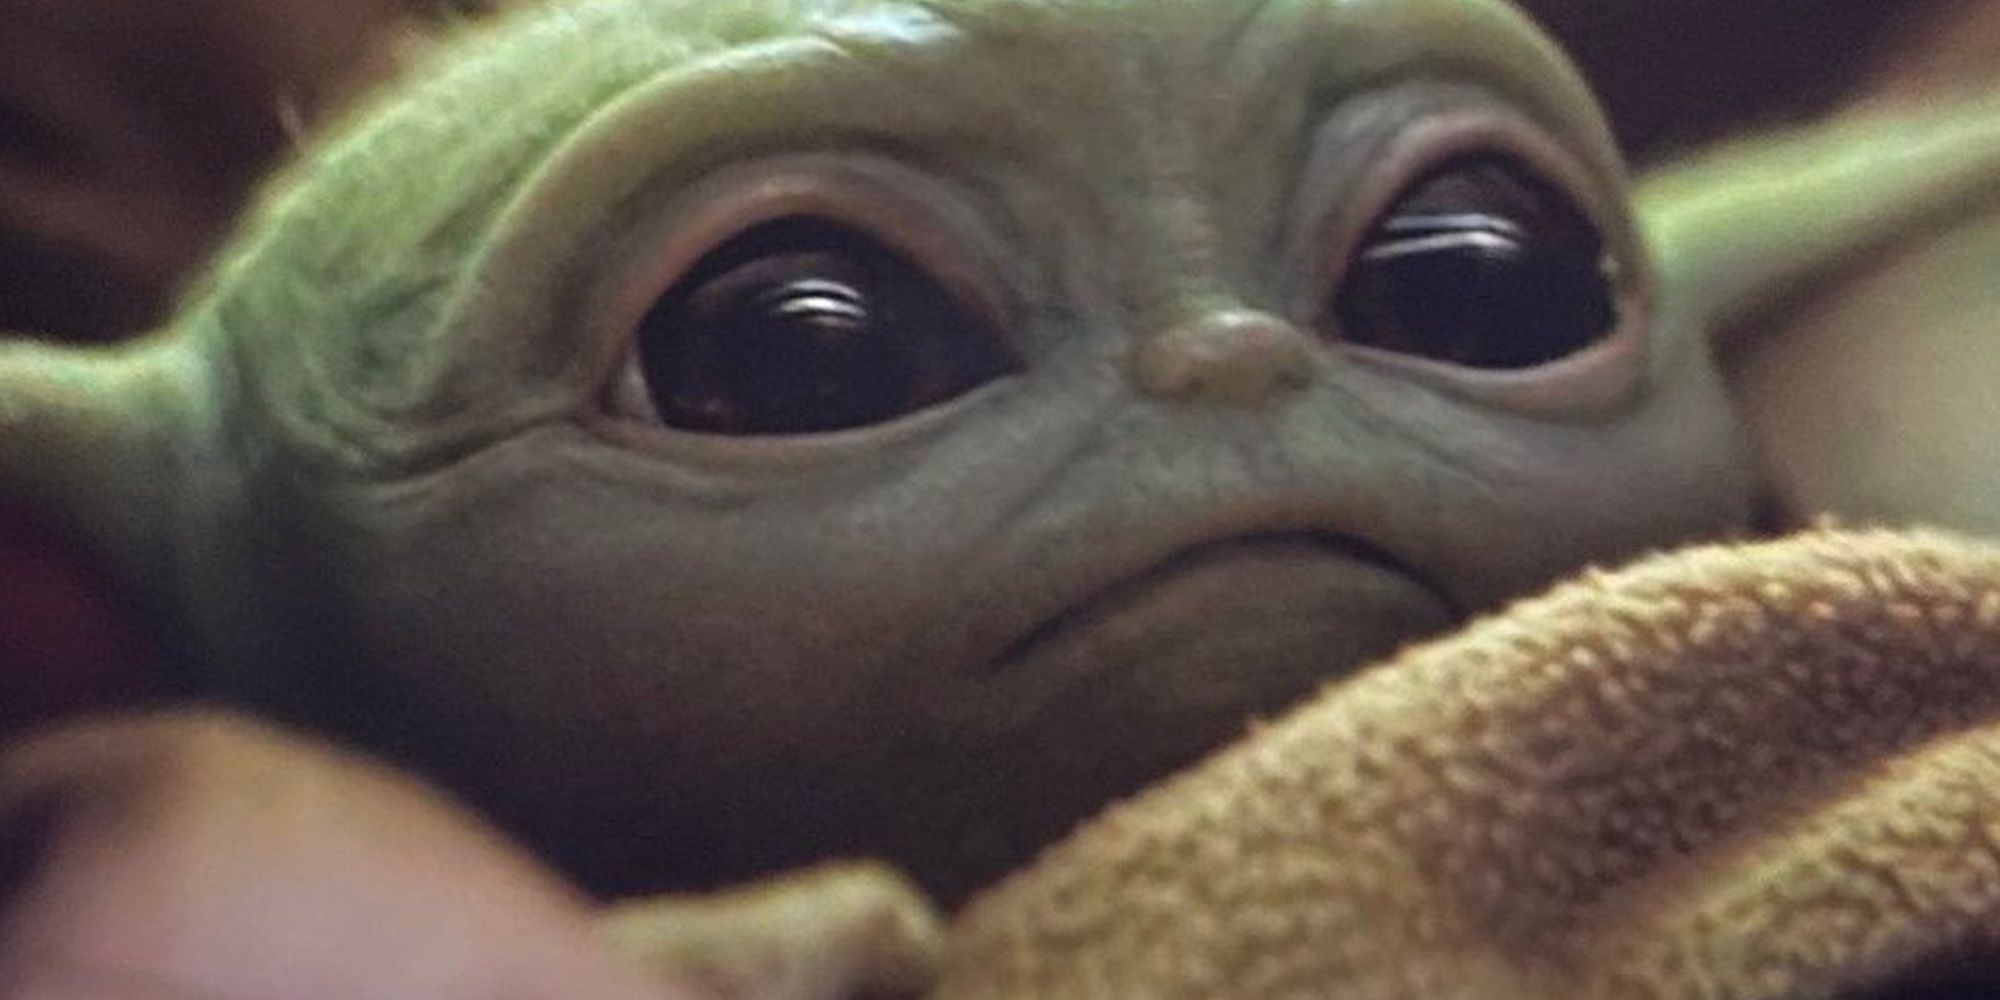 5 Reasons Baby Yoda Is Good (And 5 Why He’ll Go To The Dark Side)